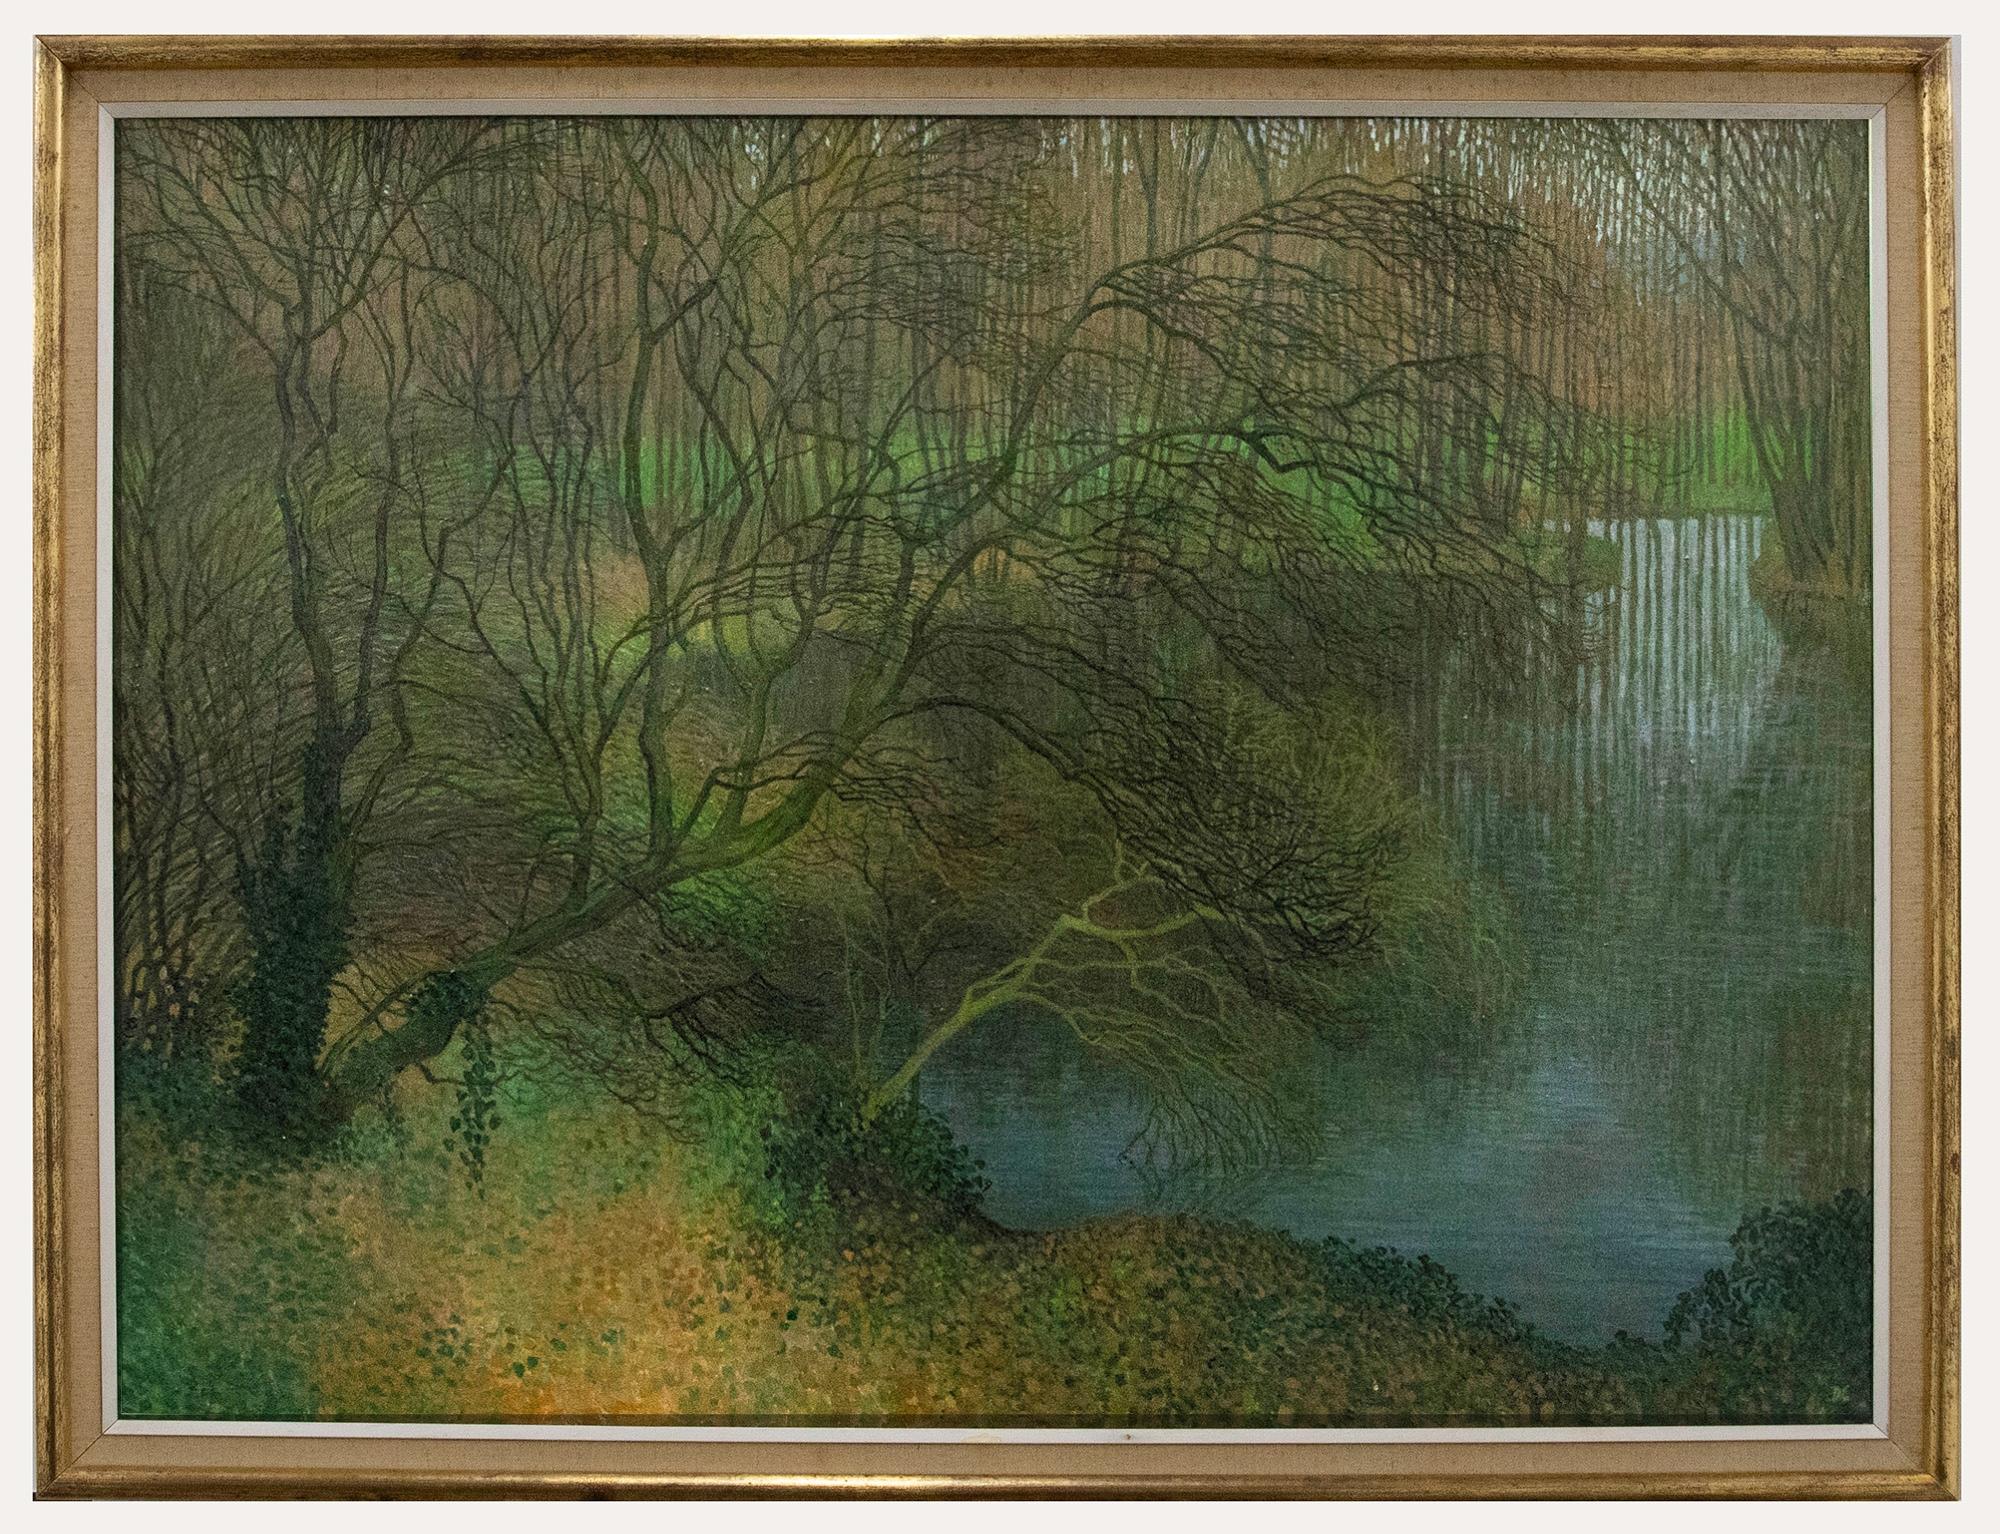 Unknown Landscape Painting - Diana Calver (b.1941) - Framed 20th Century Oil, Absorbed in Nature